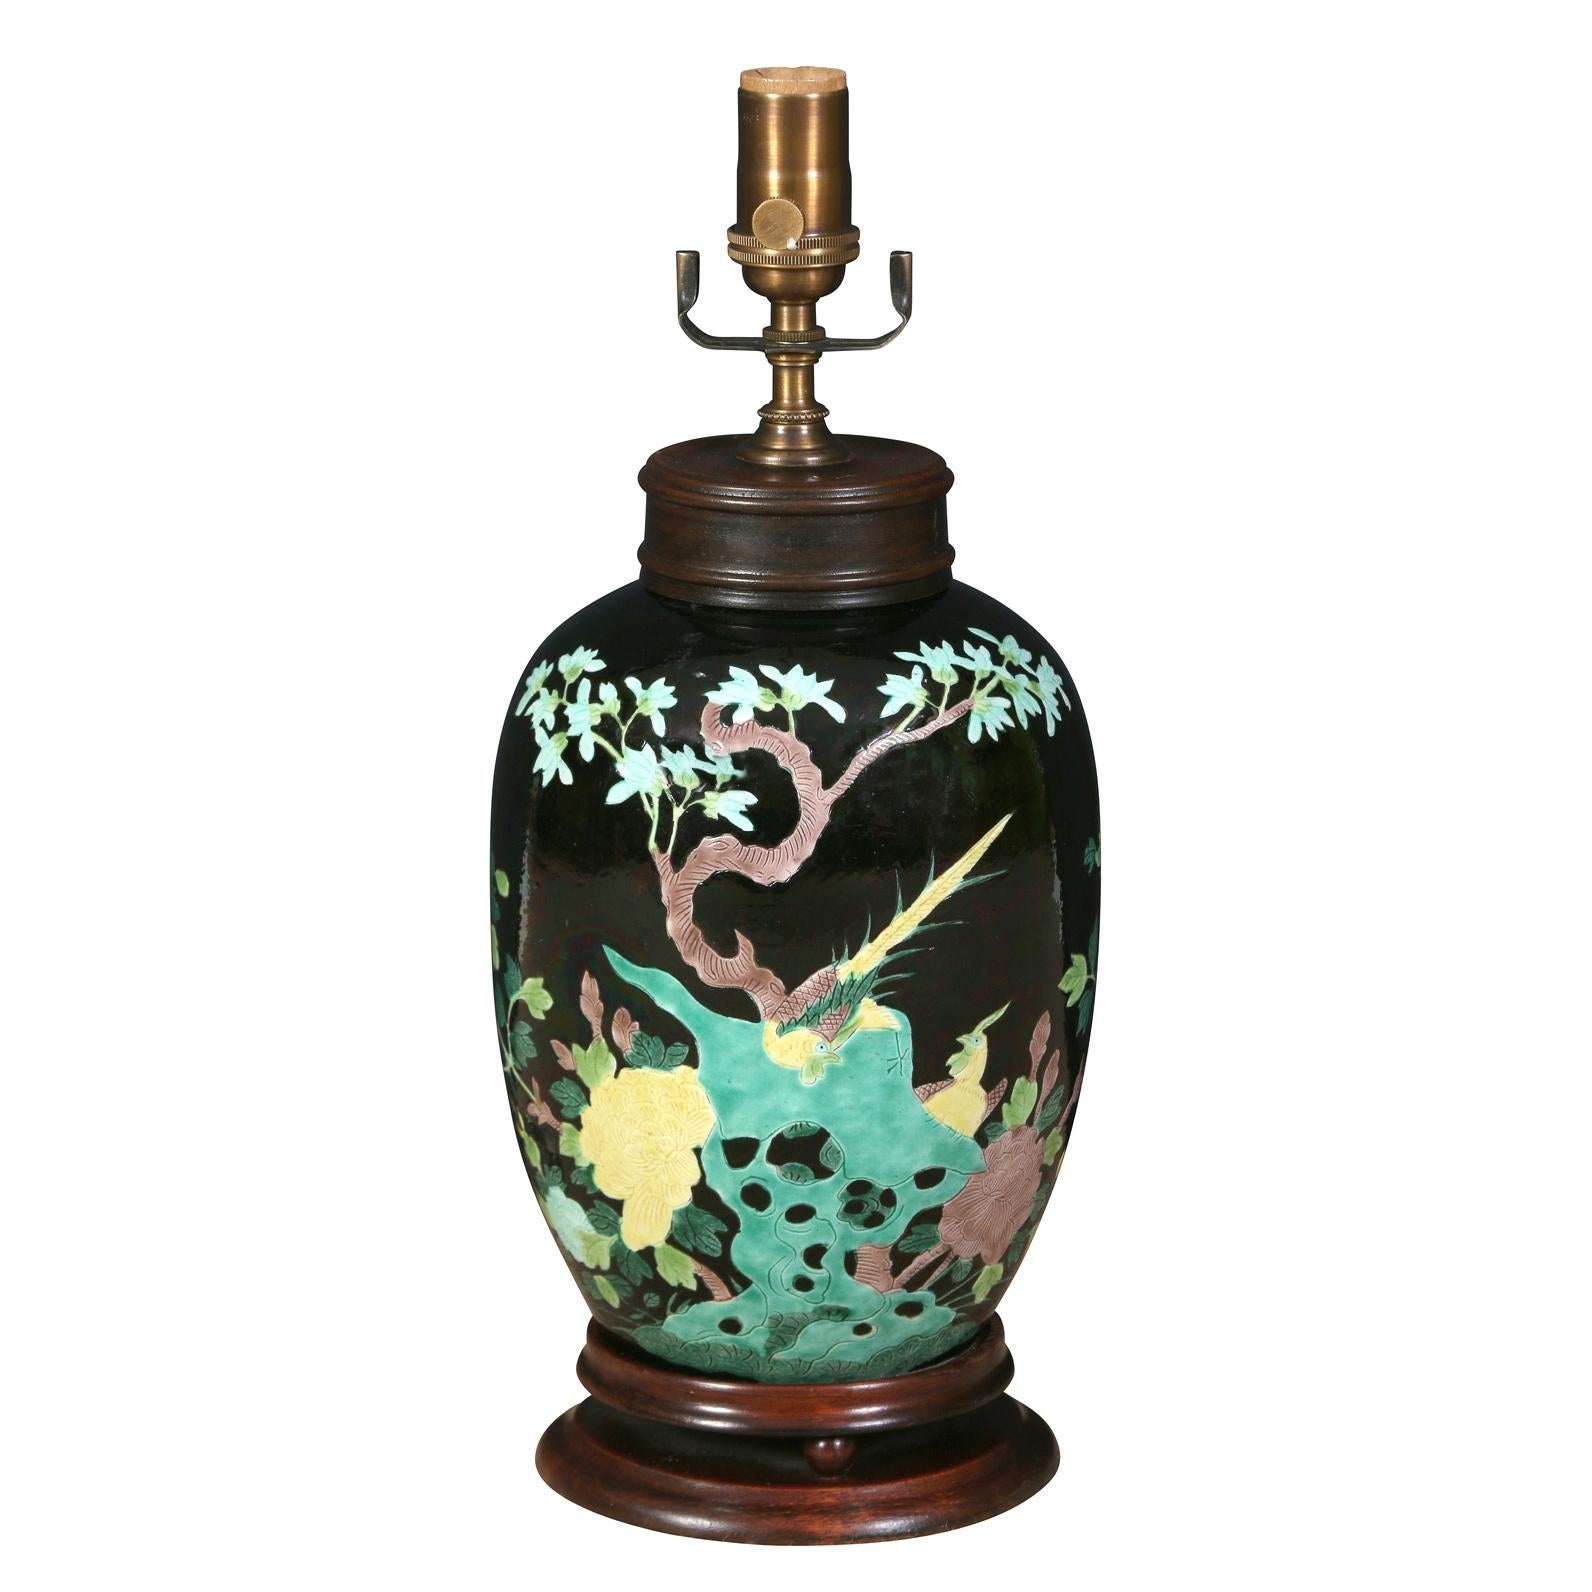 A pair of eye-catching Chinese export porcelain lamps with a black ground, decorated with branches, flowers and butterflies in beautiful tones of green, yellow and soft brown. The lamps are urn shaped and are mounted on a stained wood base.